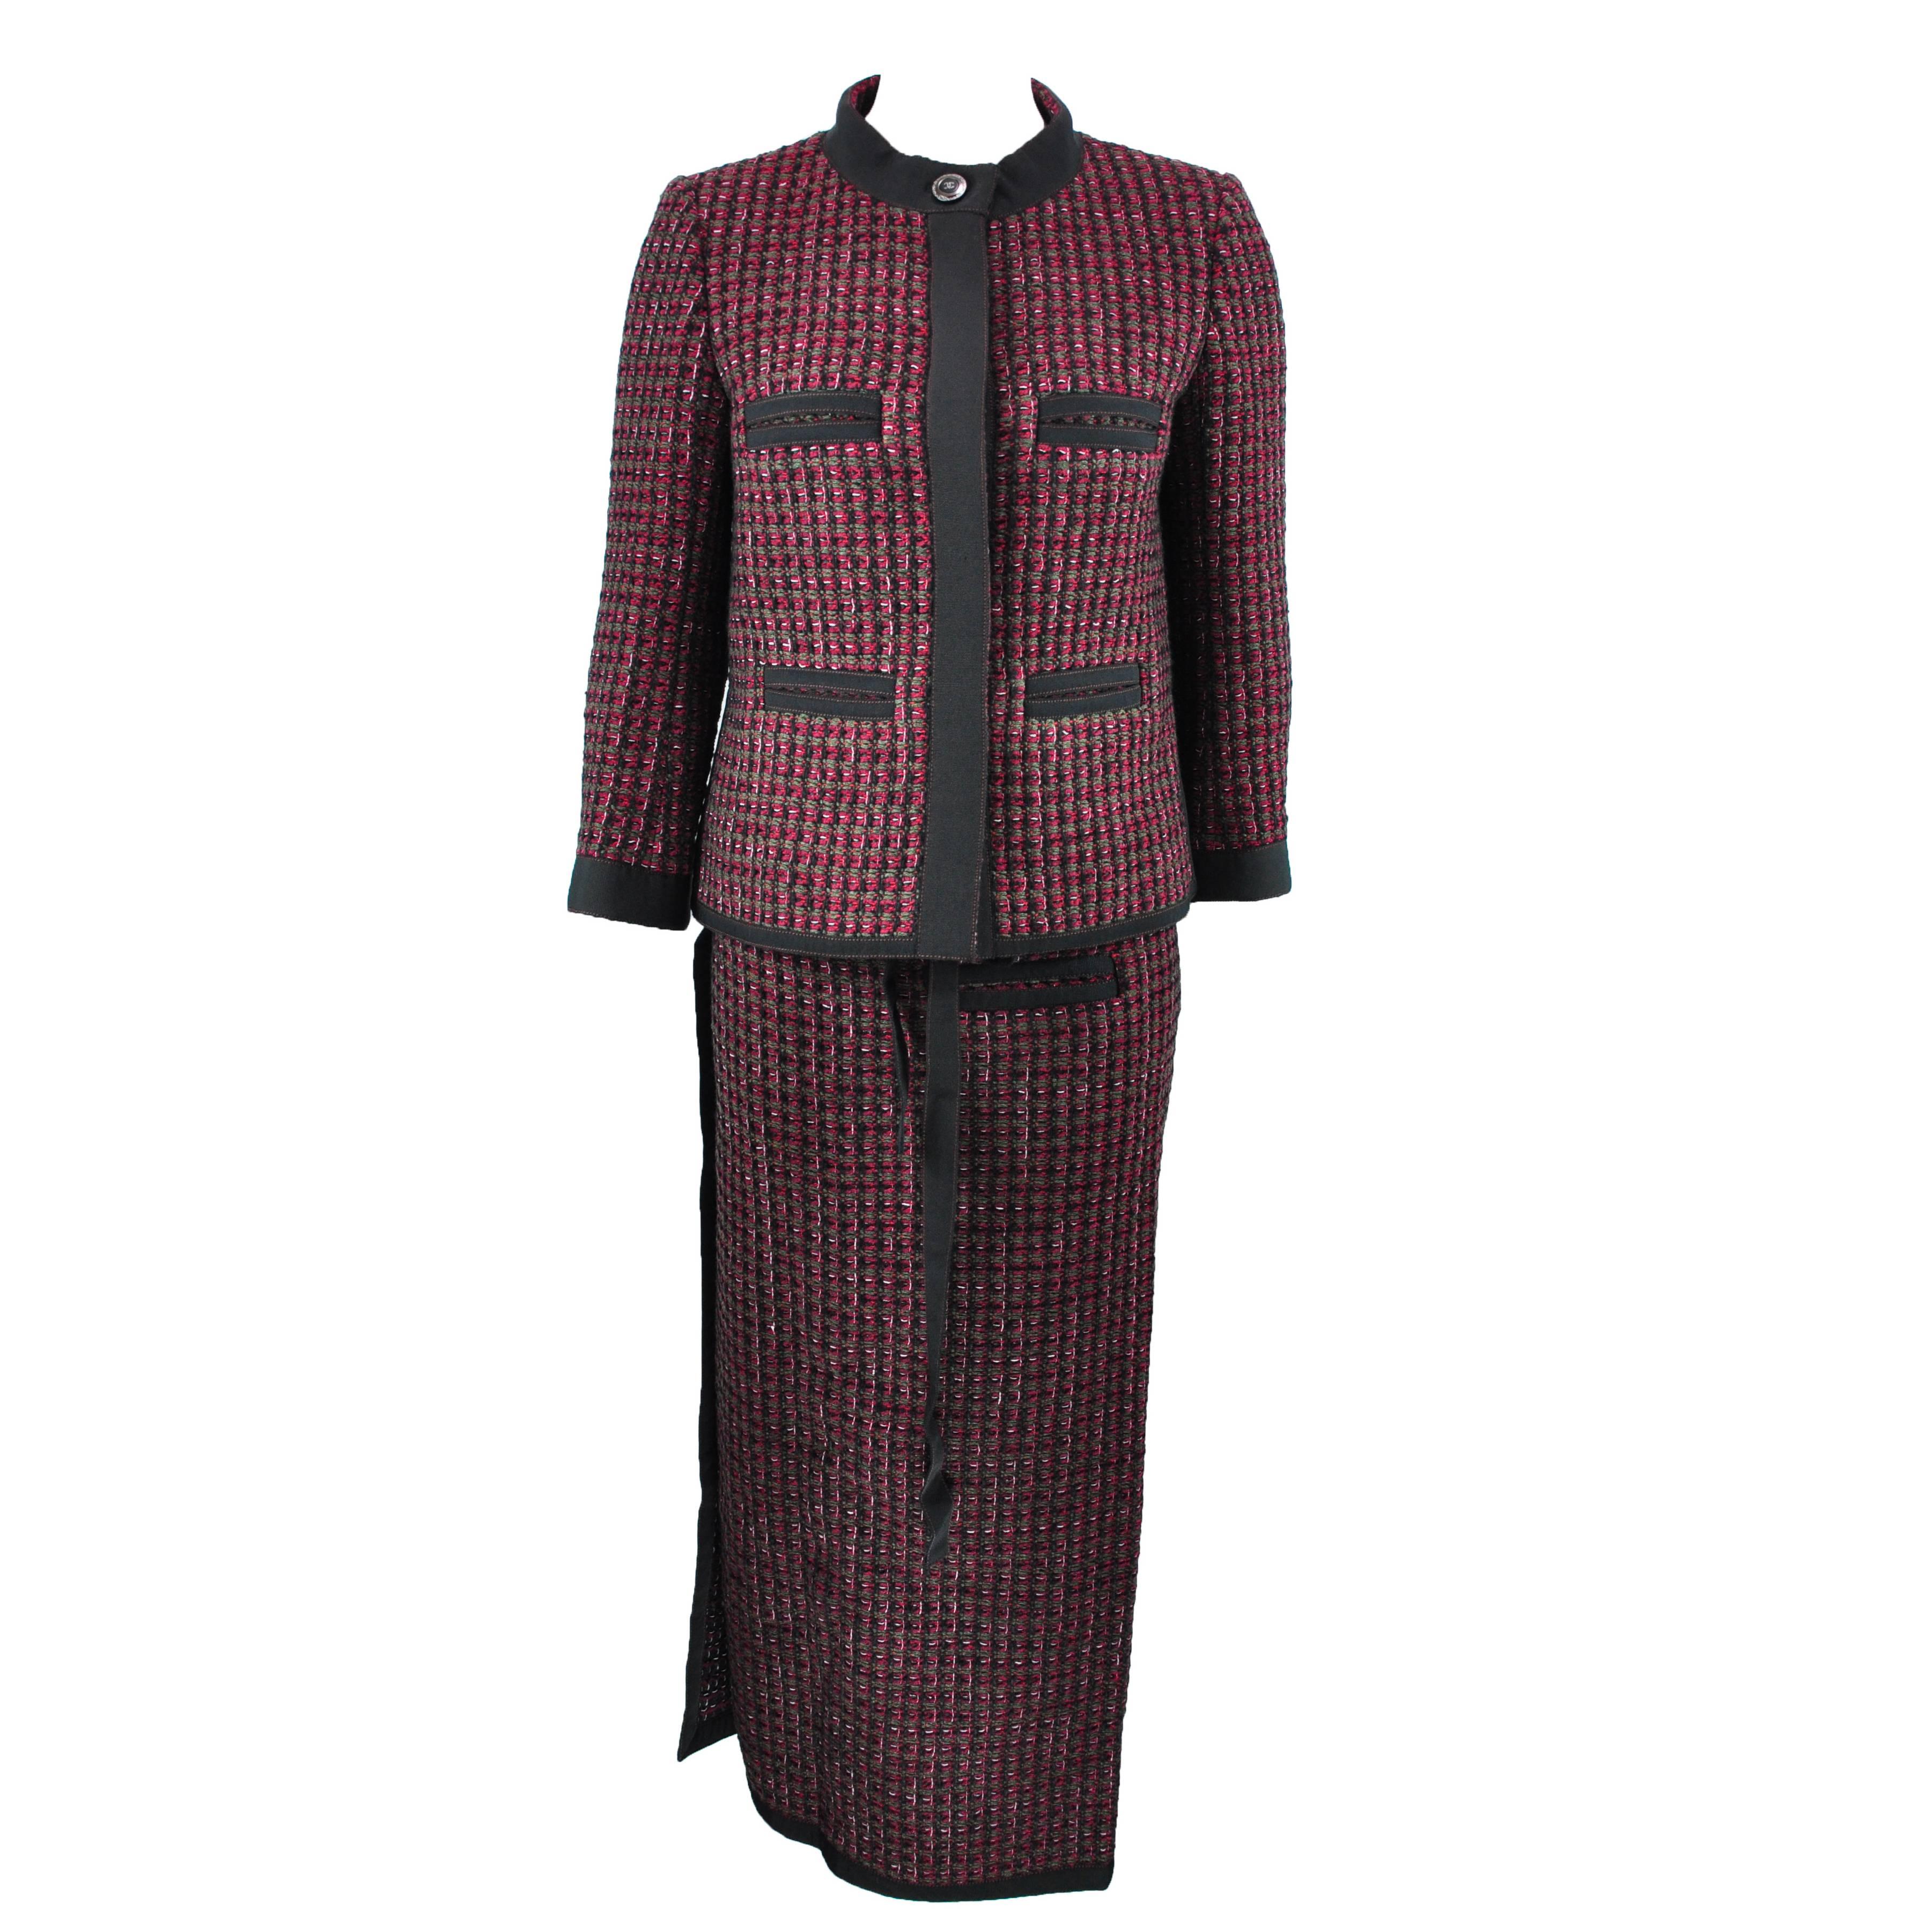 Chanel 2015 Brasserie Multi-color Fantasy Tweed Jacket with Apron FR38 New For Sale